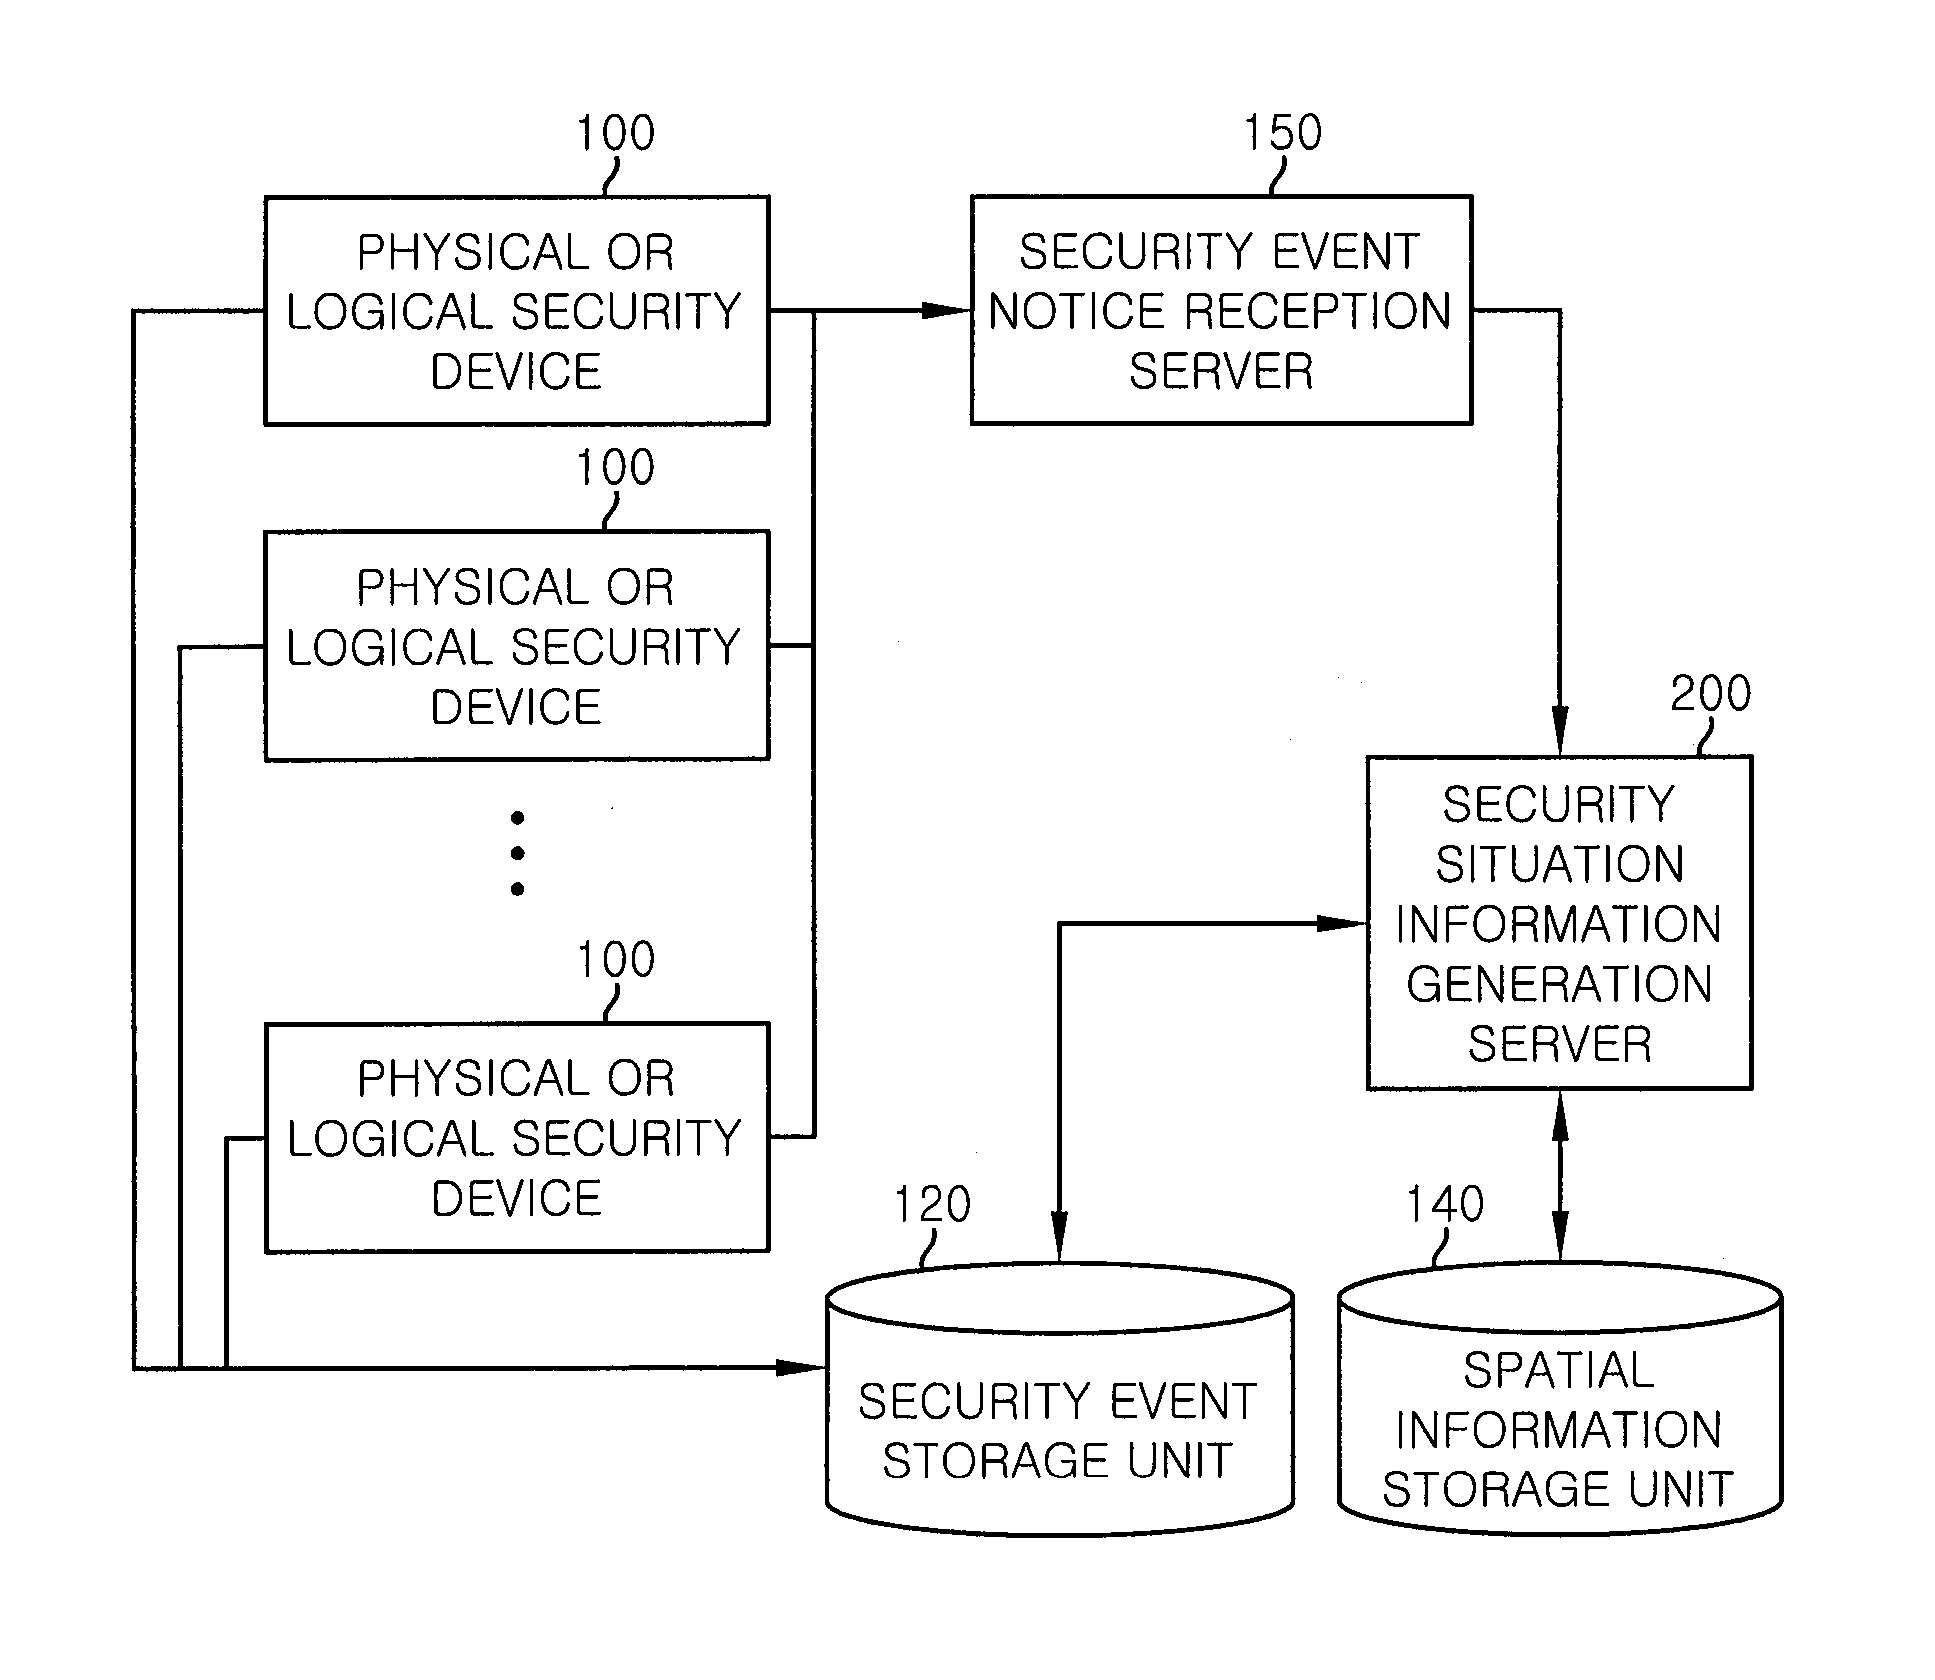 Apparatus and method for recognizing security situation and generating situation information based on spatial linkage of physical and it security